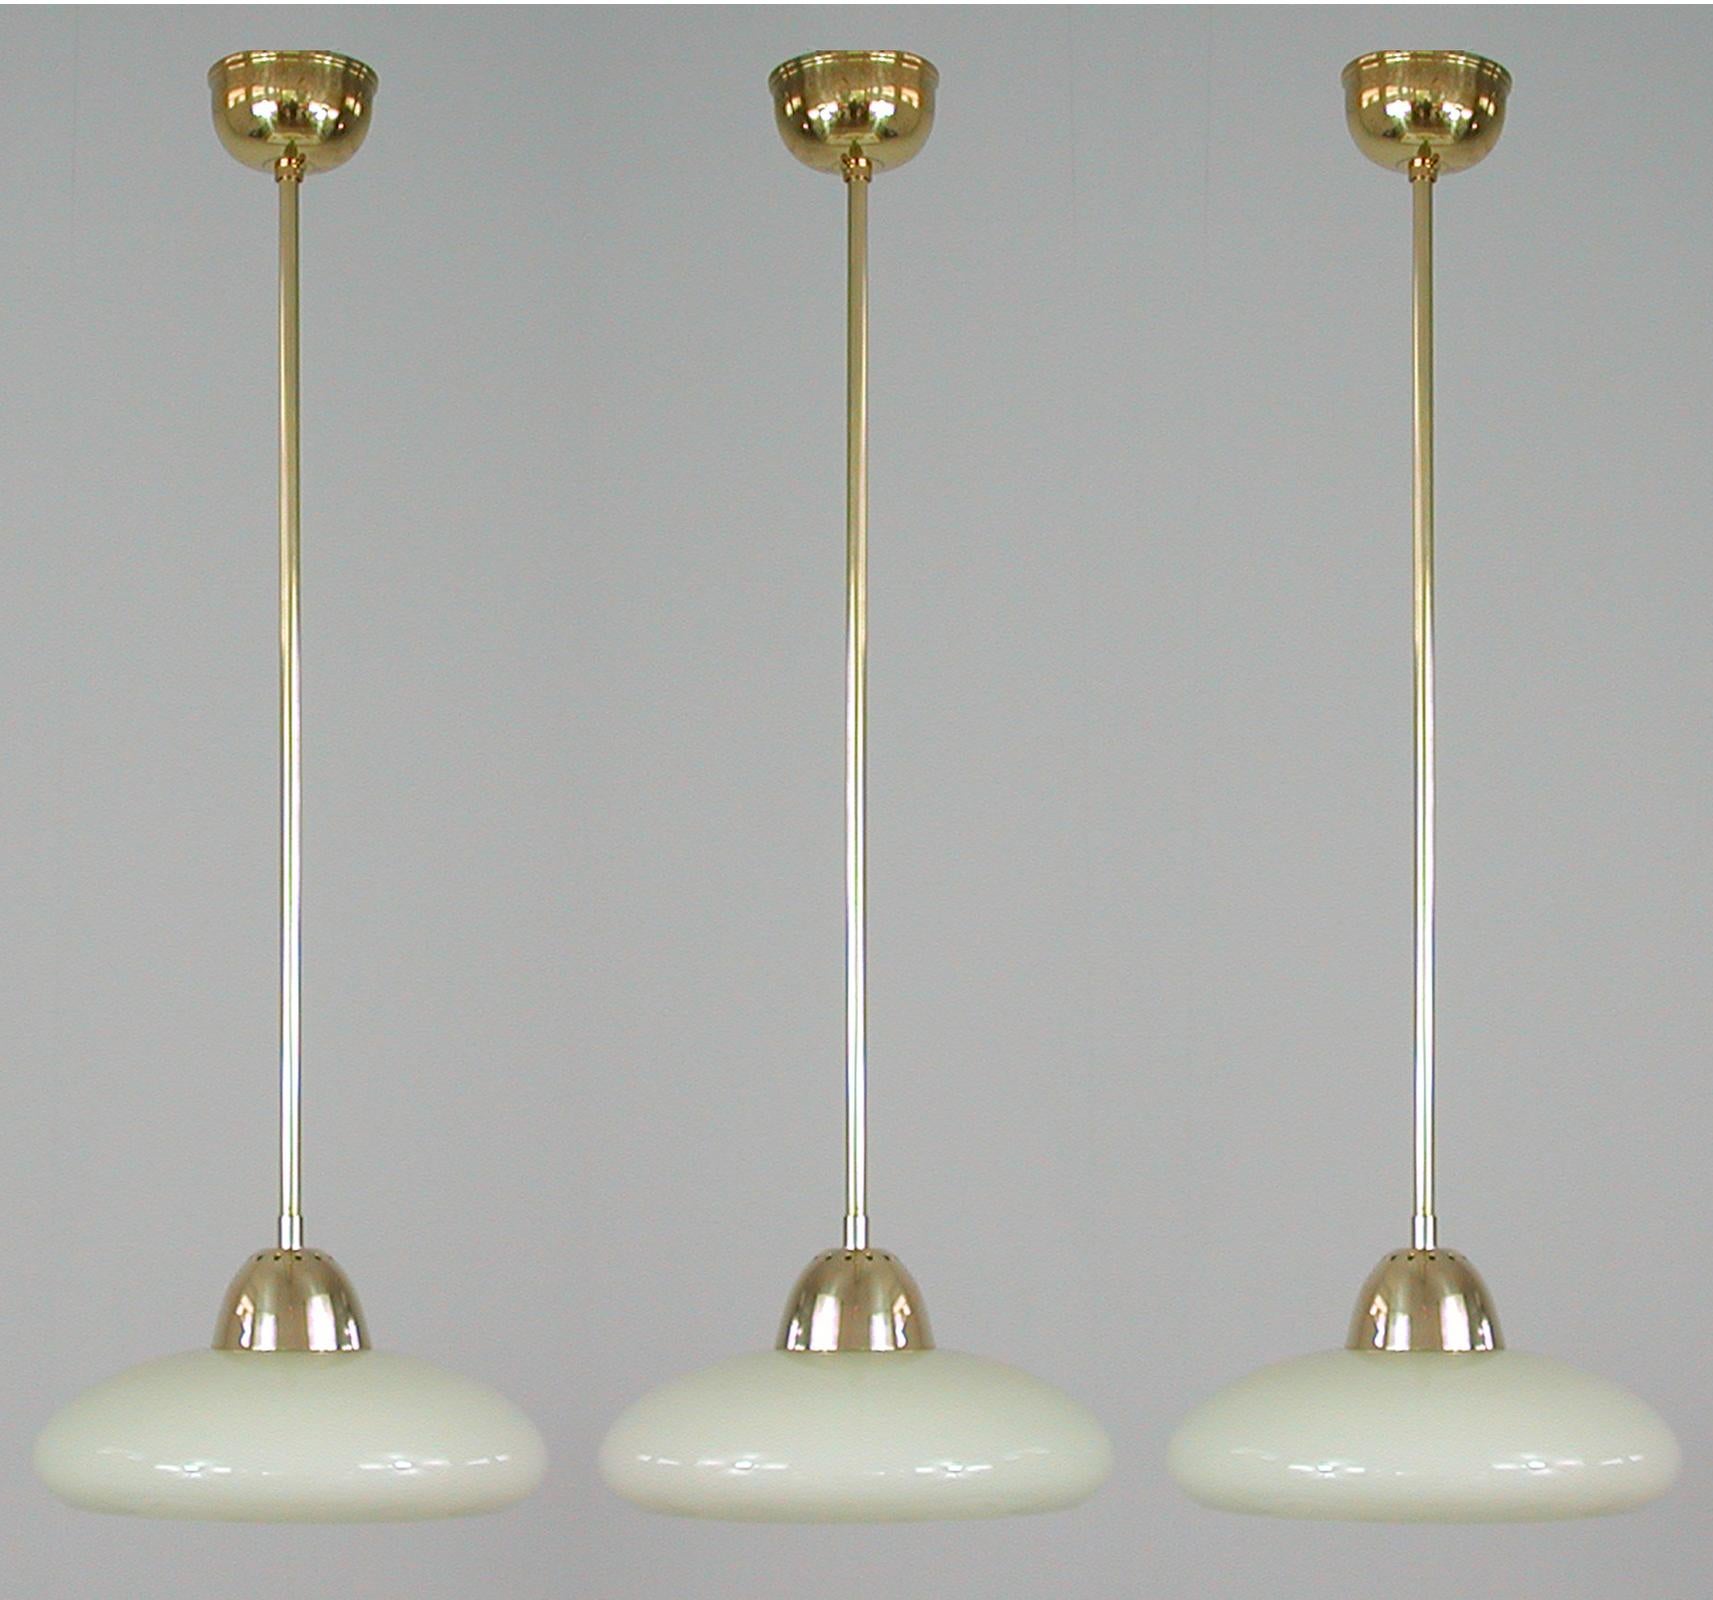 This elegant minimalist Art Deco pendant was designed and manufactured in Germany in the 1930s to 1940s during the Bauhaus period. 

The light features a round cream/ivory colored opaline lampshade (mouth blown) and brass hardware. It requires one